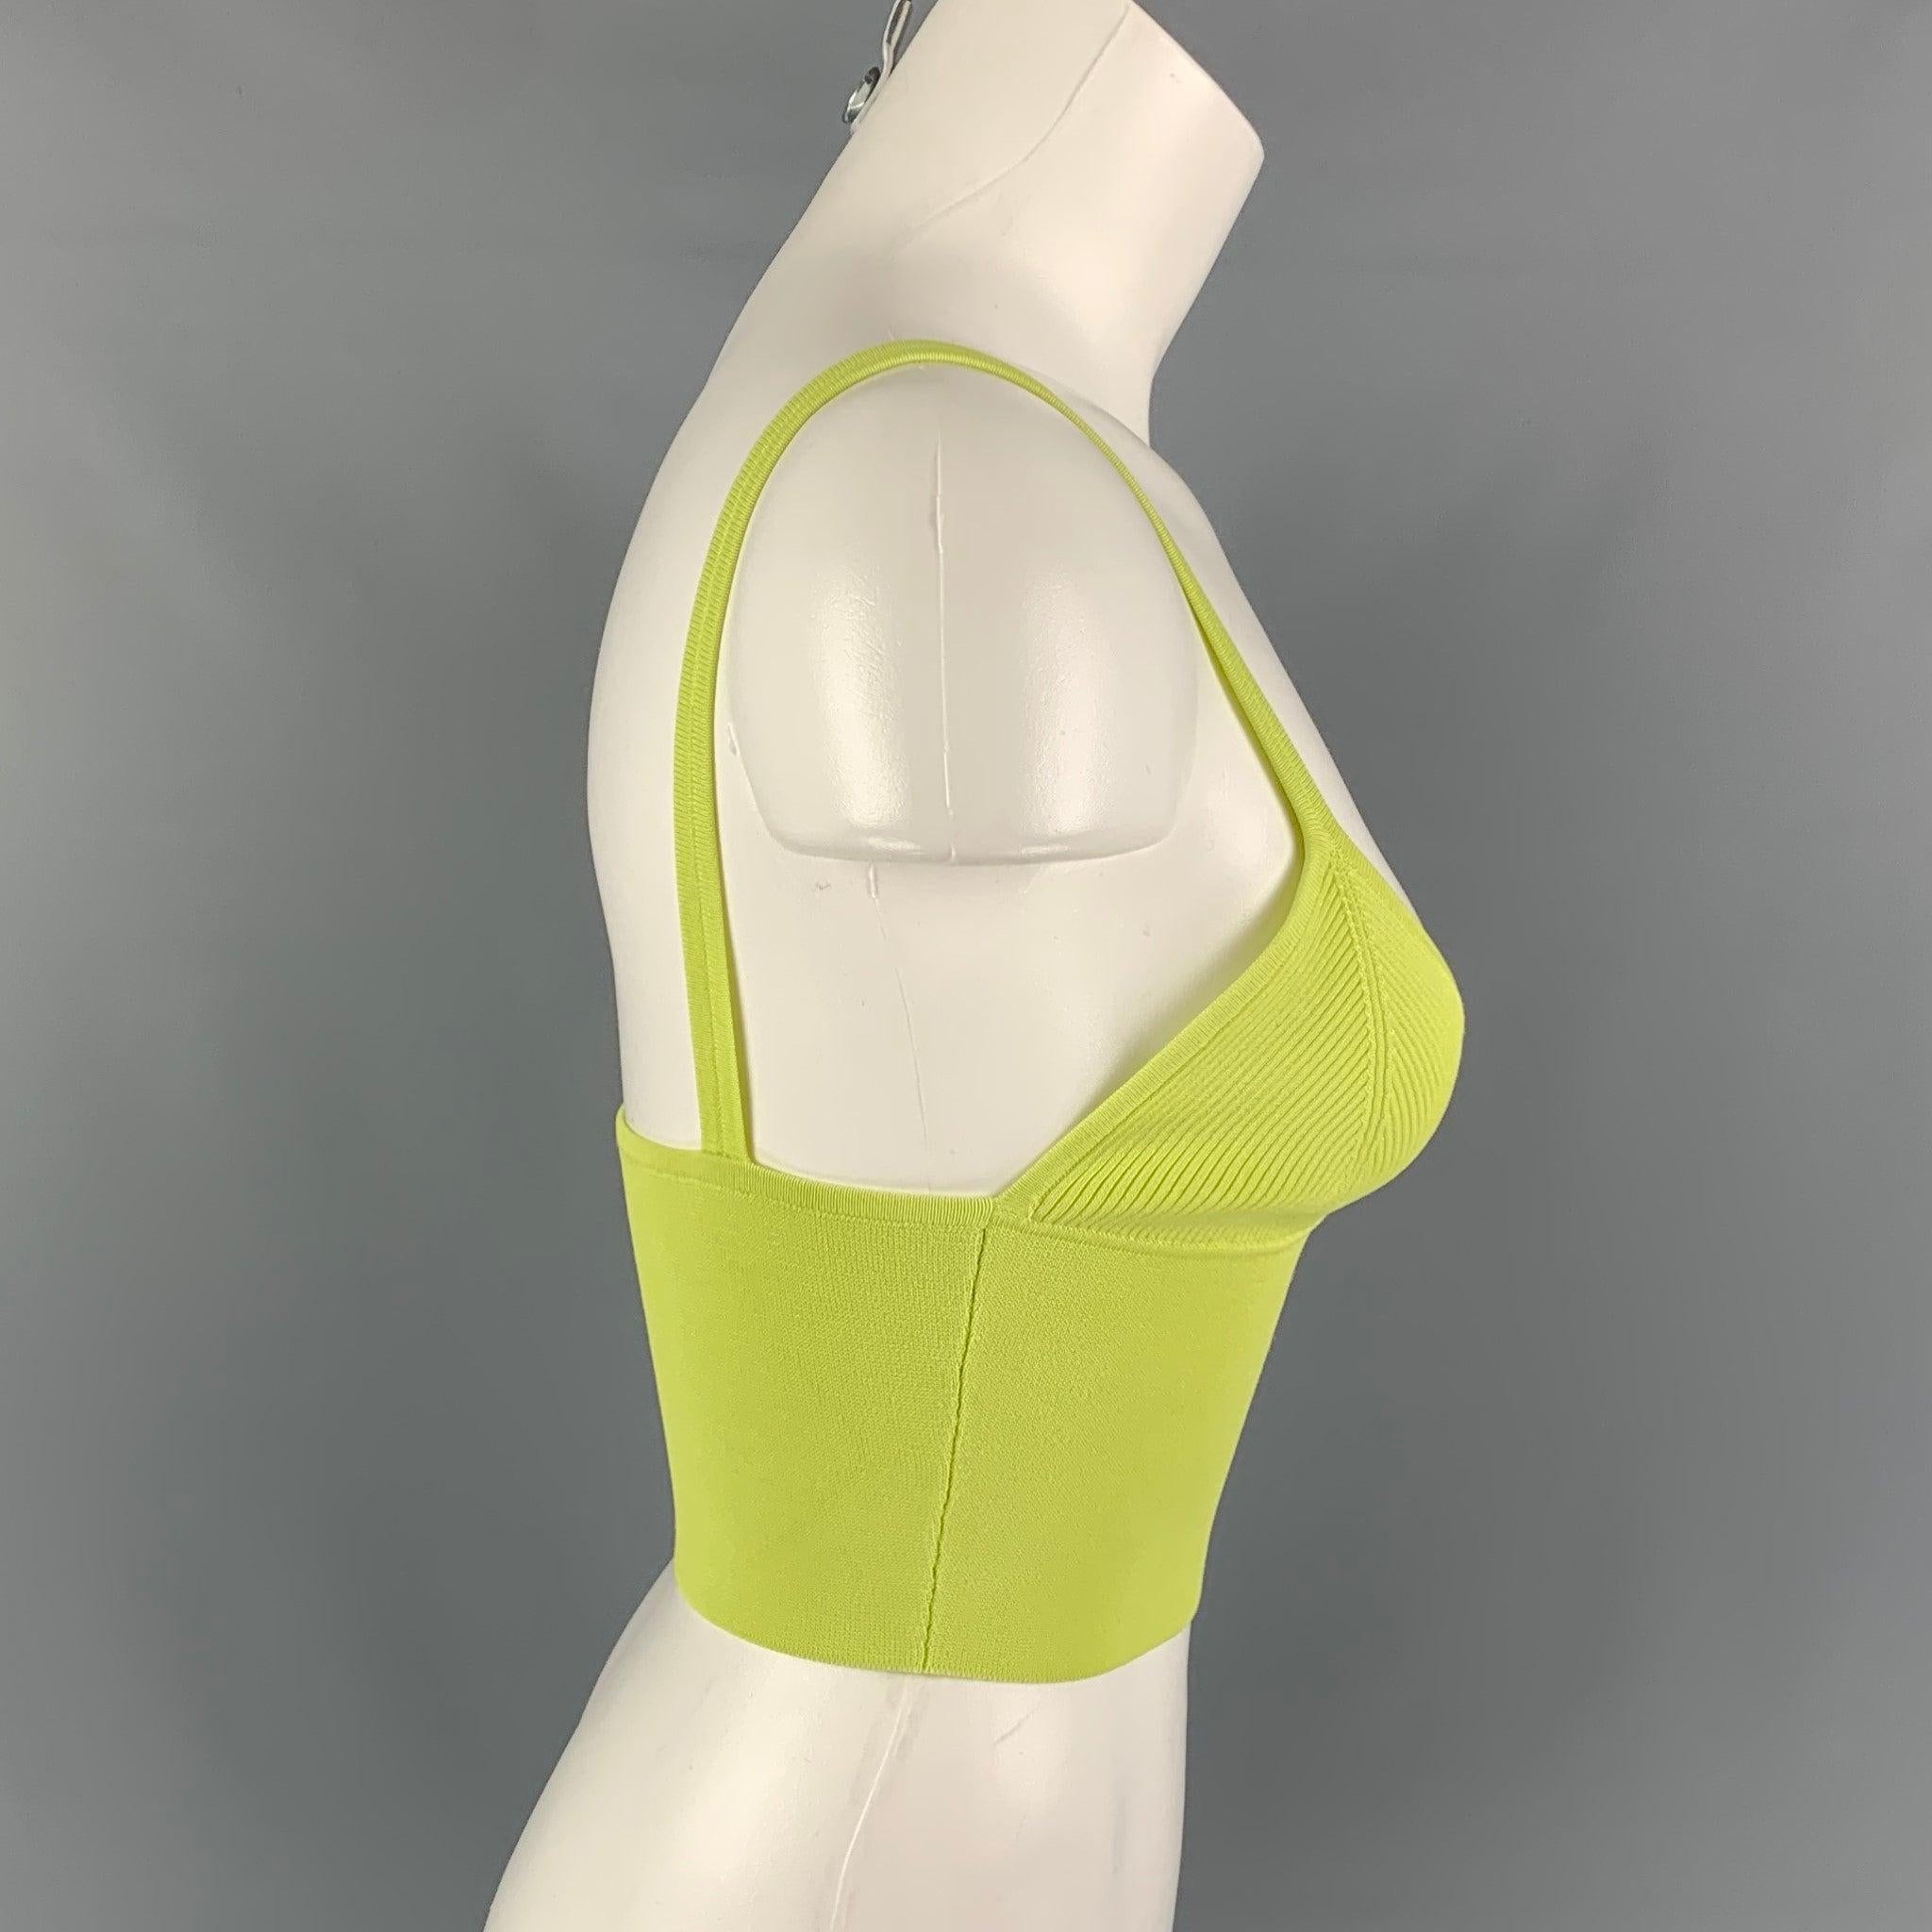 DION LEE 'Density' top comes in a neon yellow rayon blend featuring a bralette style and a rib knit trim. Very Good
Pre-Owned Condition. 

Marked:   UK 6 / US 2 / FR 34 / IT 38 / JP 5 

Measurements: 
  Bust: 23 inches  Length: 5.5 inches 
  
  
